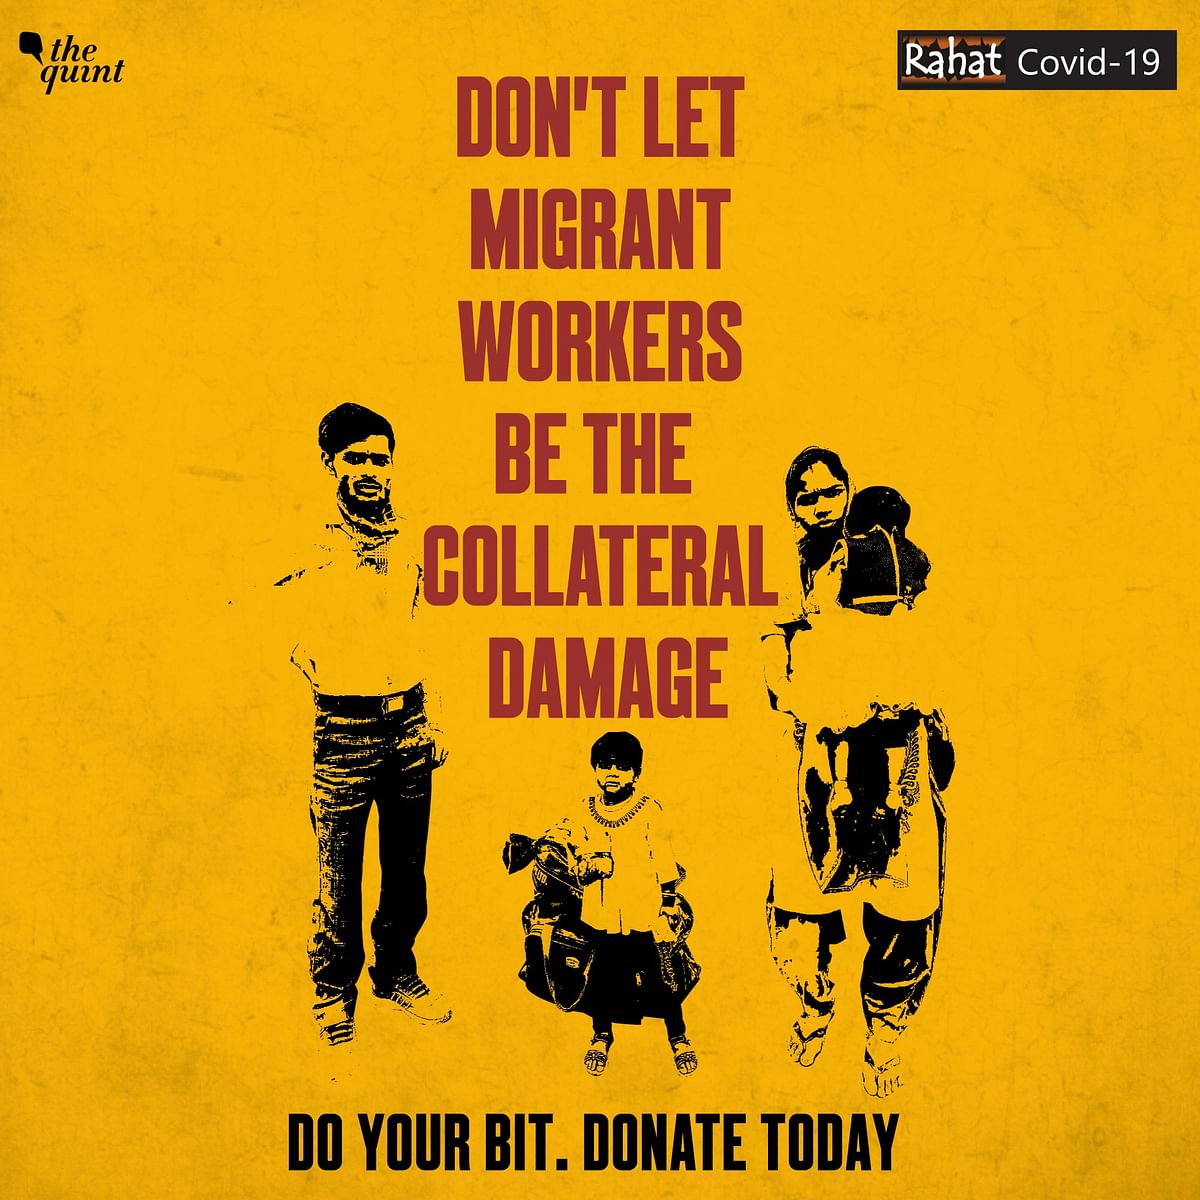 The Quint has partnered with Goonj in their Rahat COVID-19 initiative to support India’s migrant workers.  